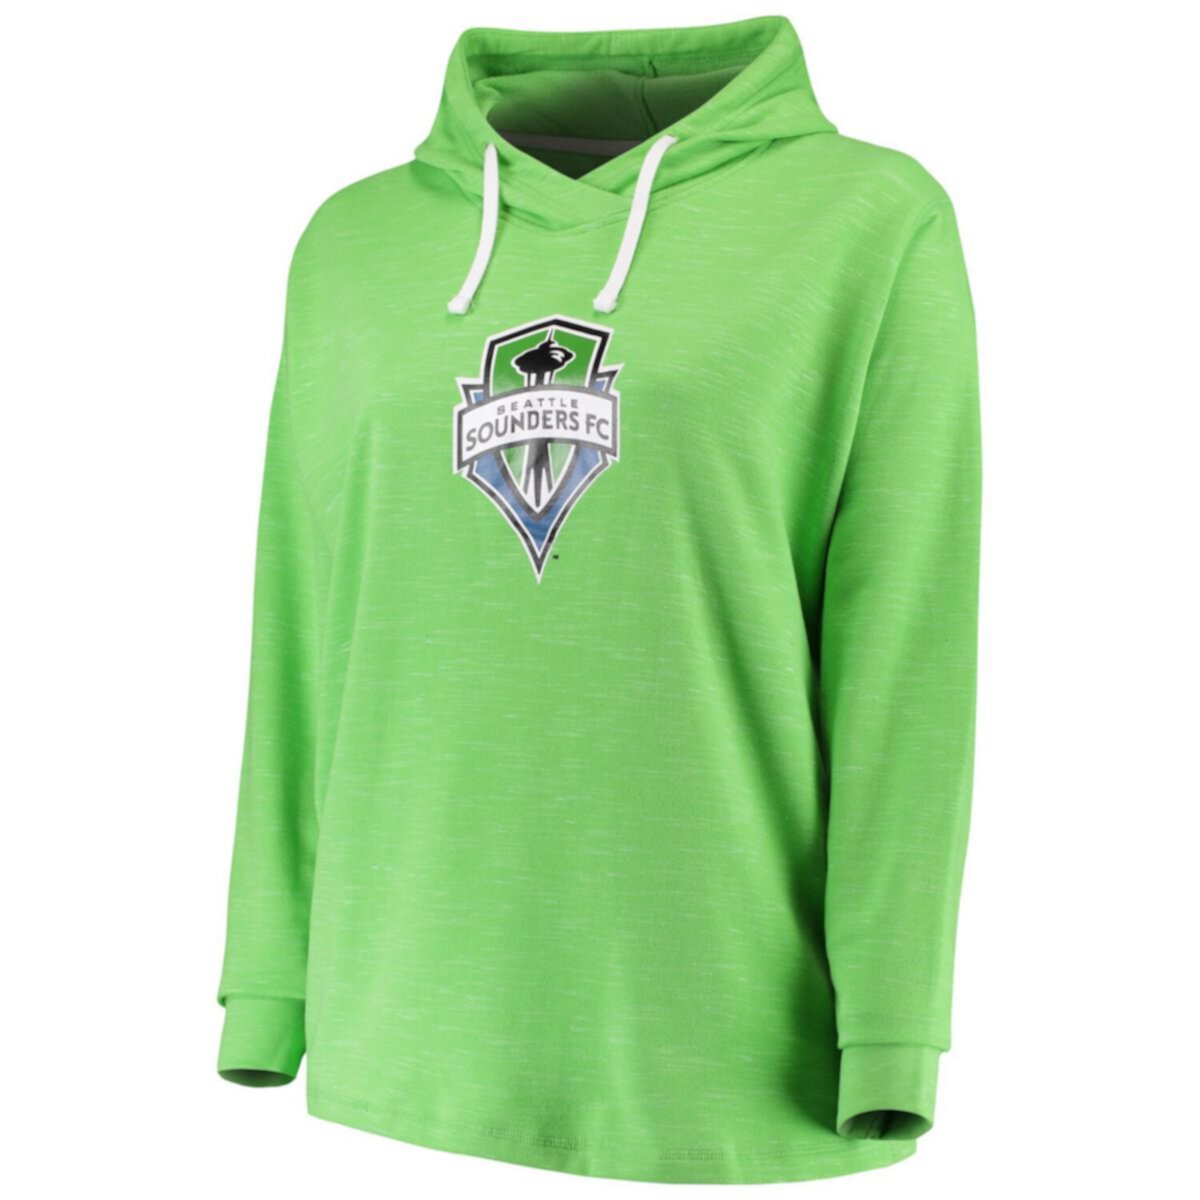 Women's Majestic Green/White Seattle Sounders FC Plus Size Contrast Heathered Pullover Hoodie Majestic